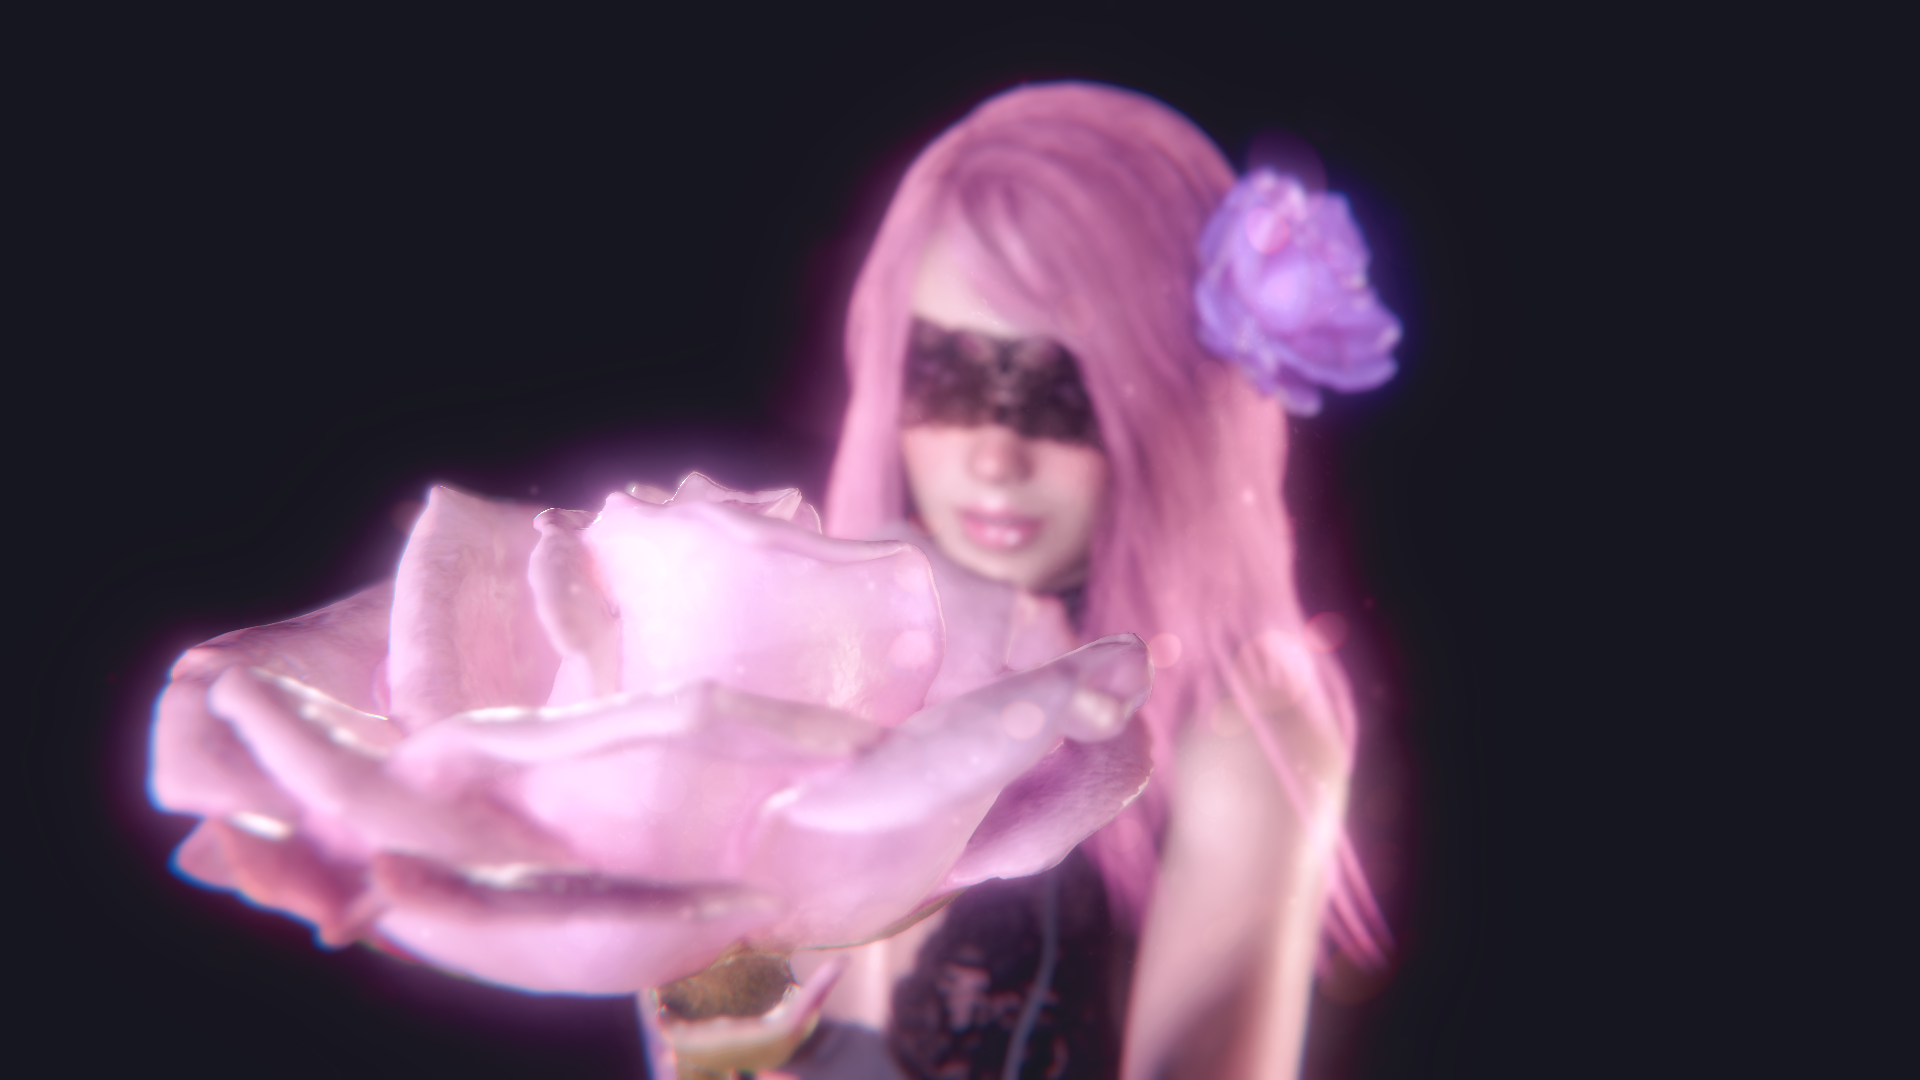 Chloe Doll with Rose Asset